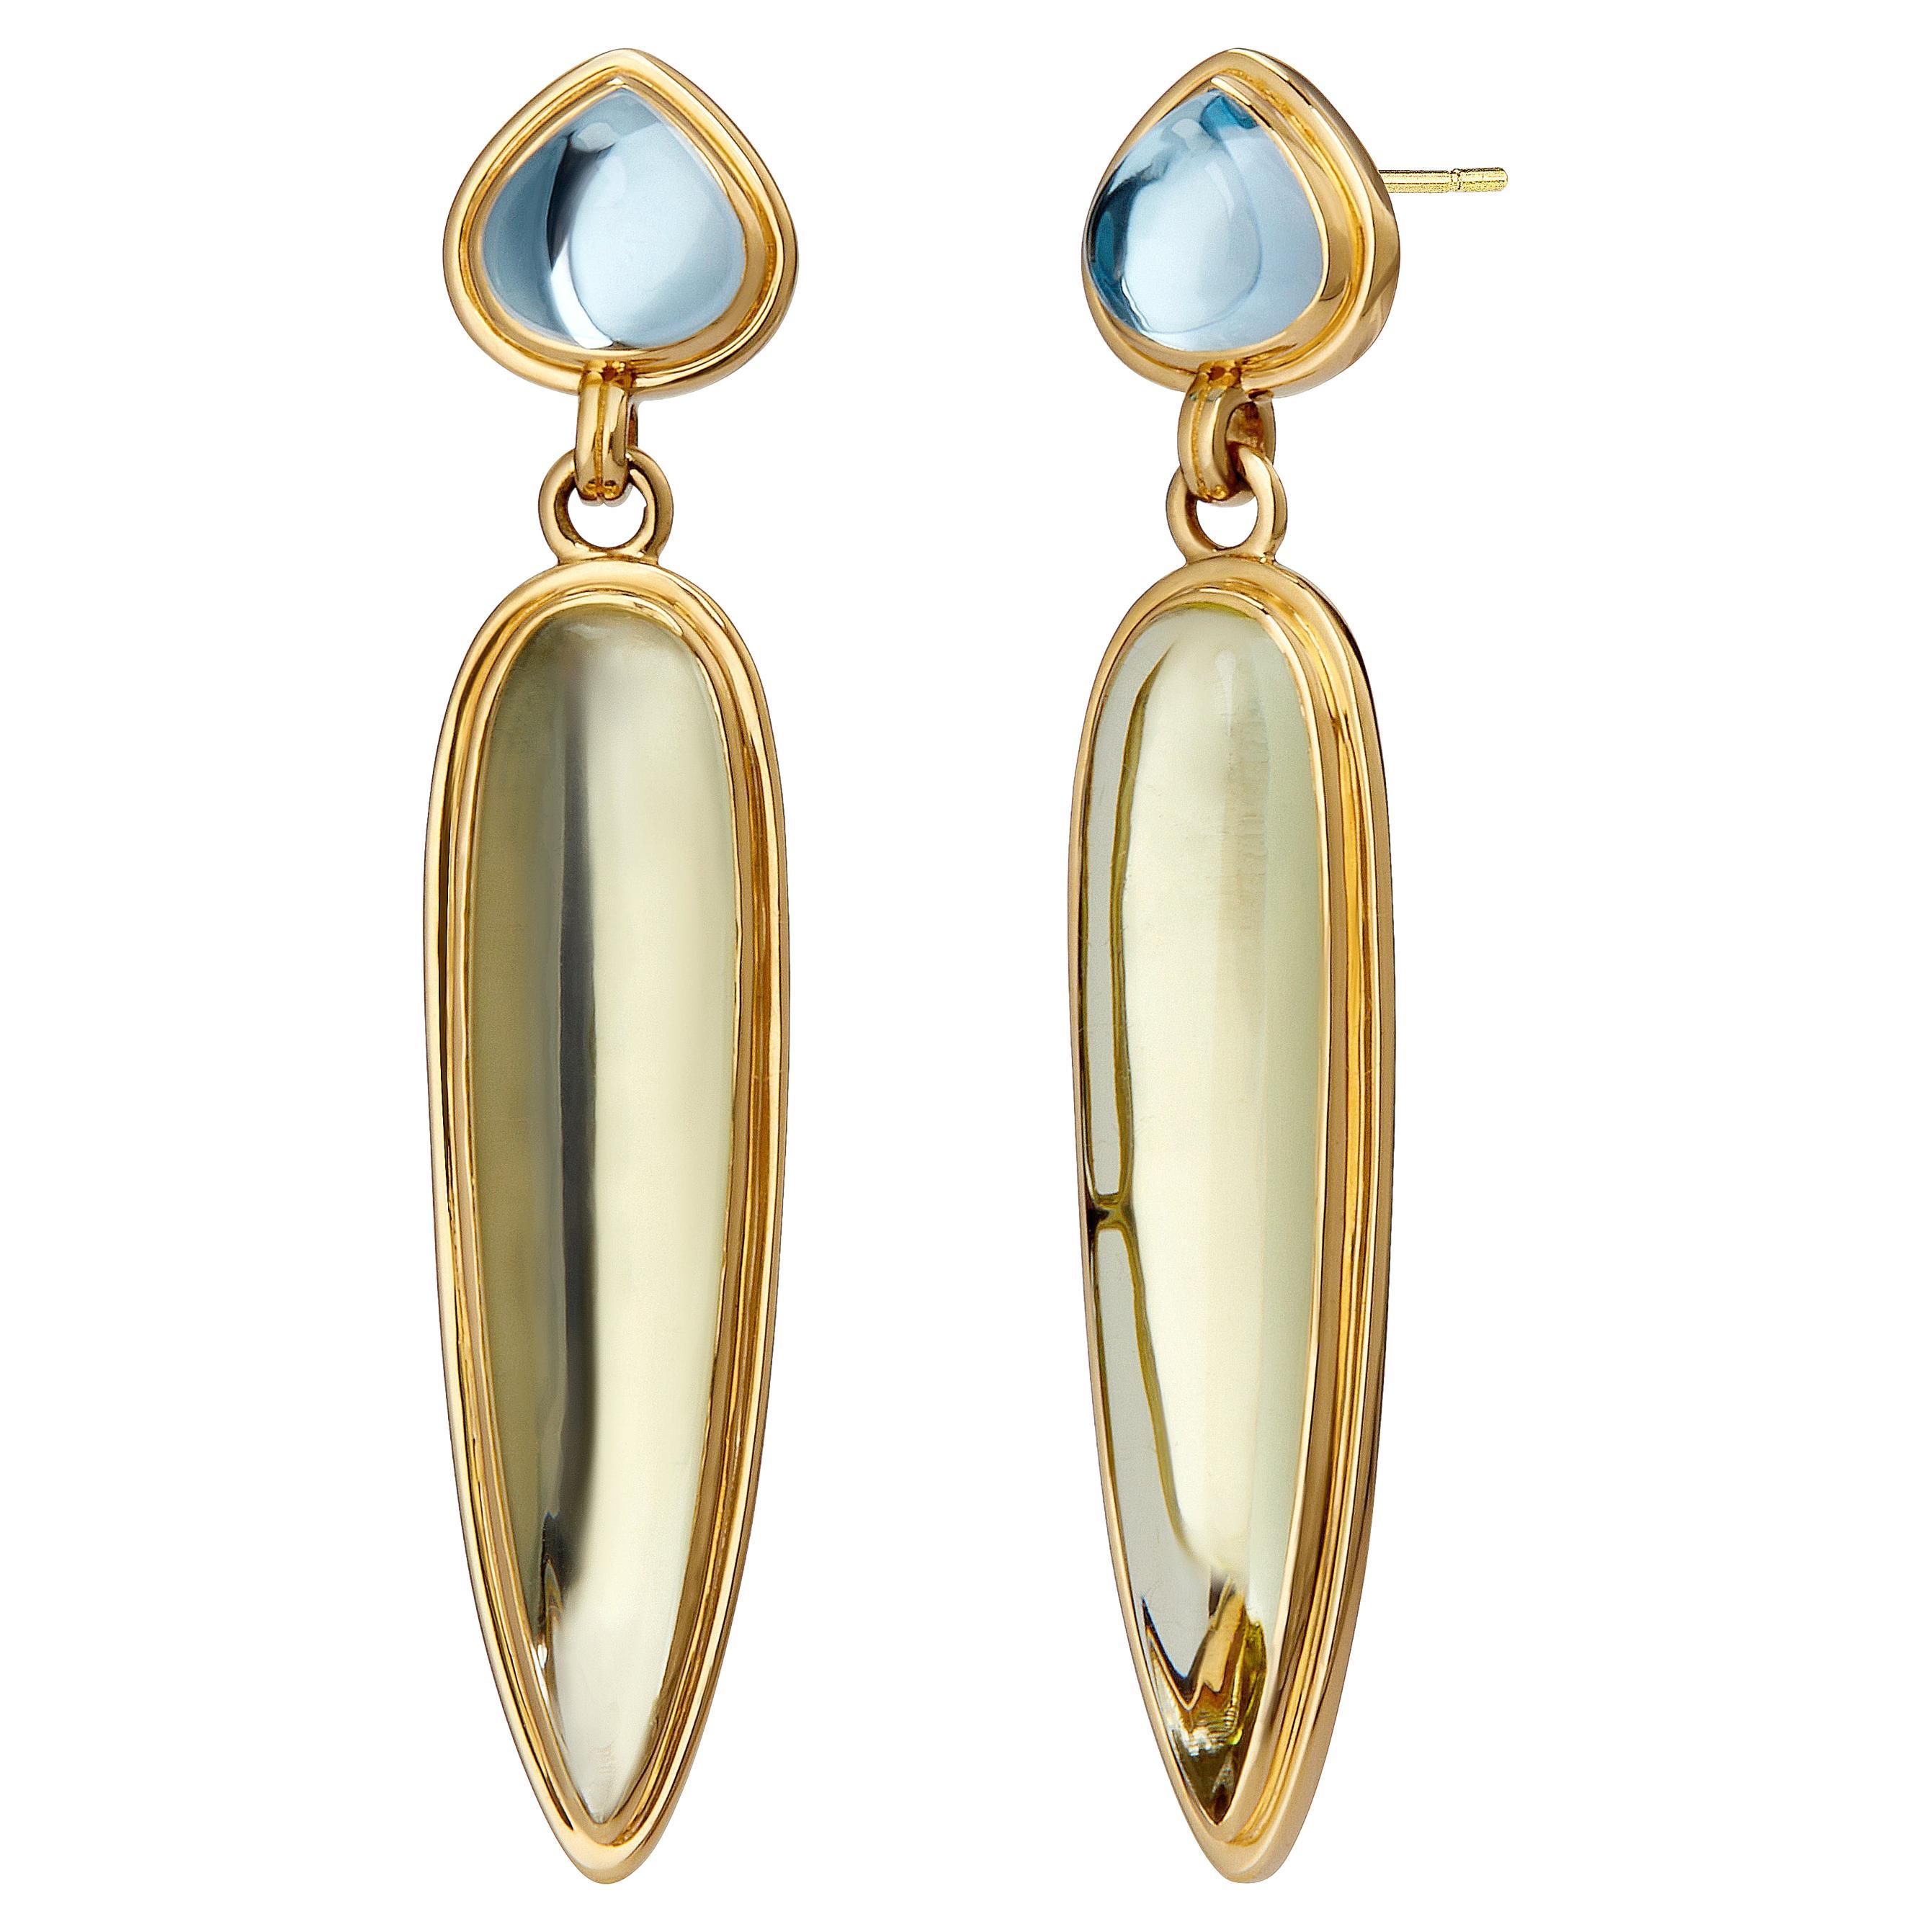 Syna Yellow Gold Earrings with Blue Topaz and Lemon Quartz